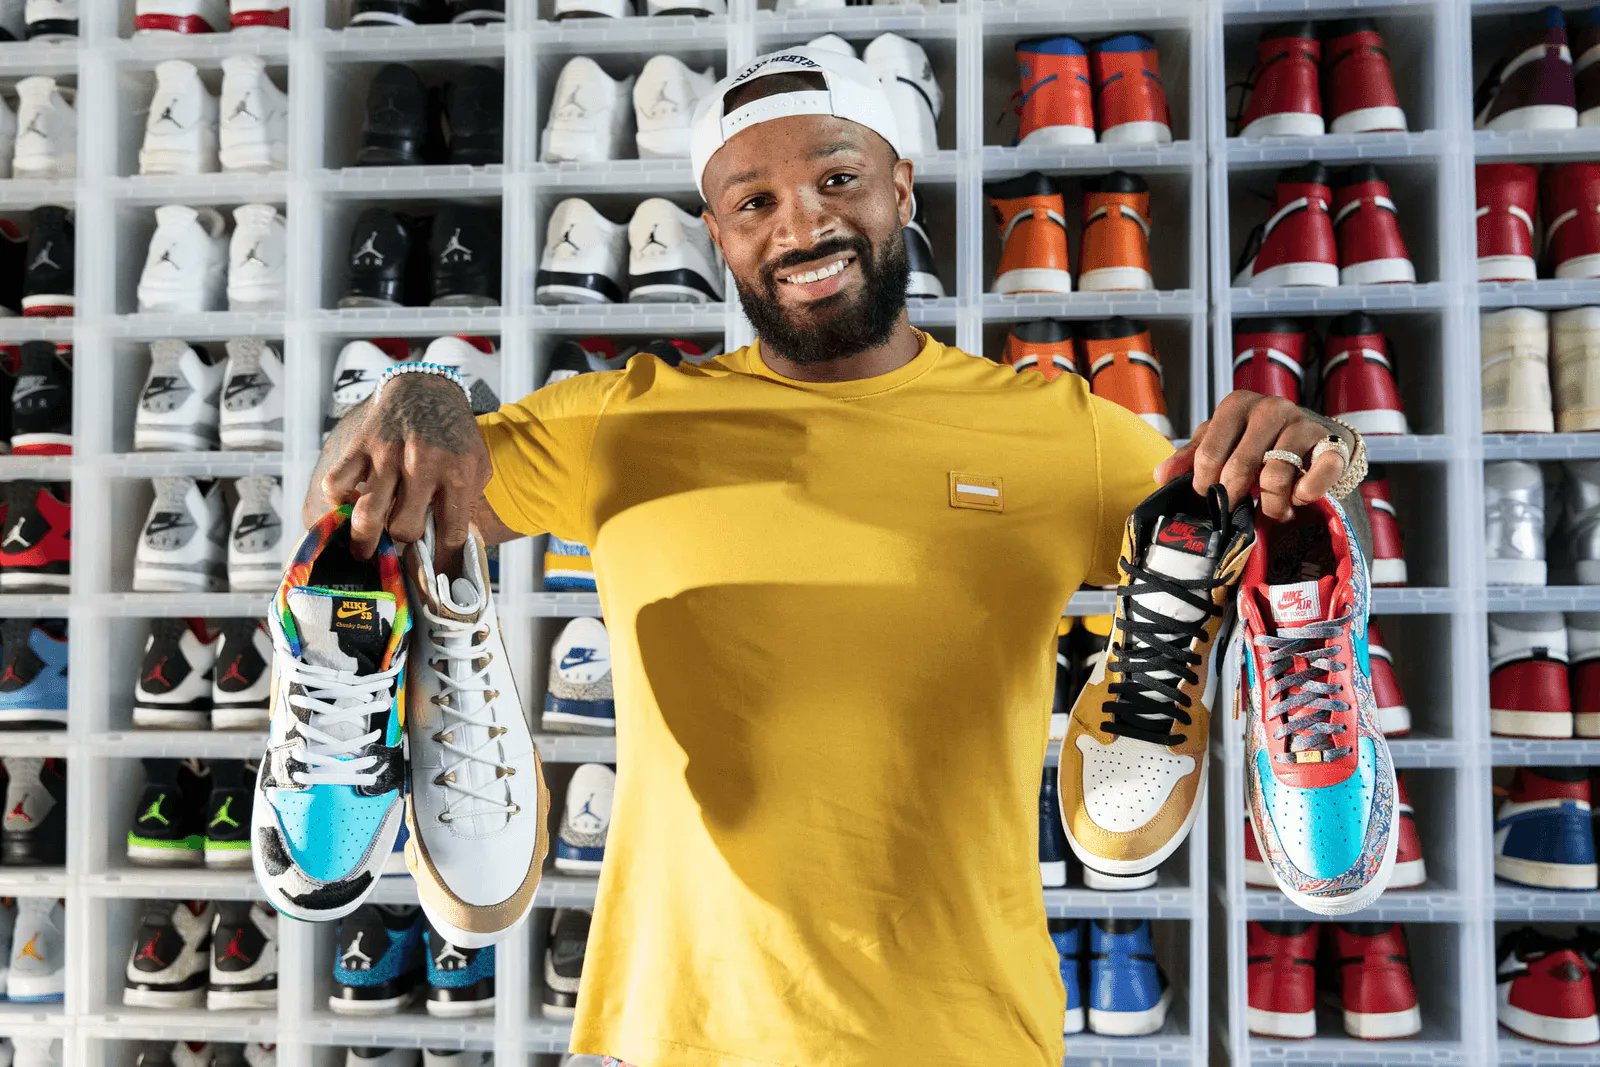 Nike x P.J. Tucker x Sixers Youth Foundation auction: Everything